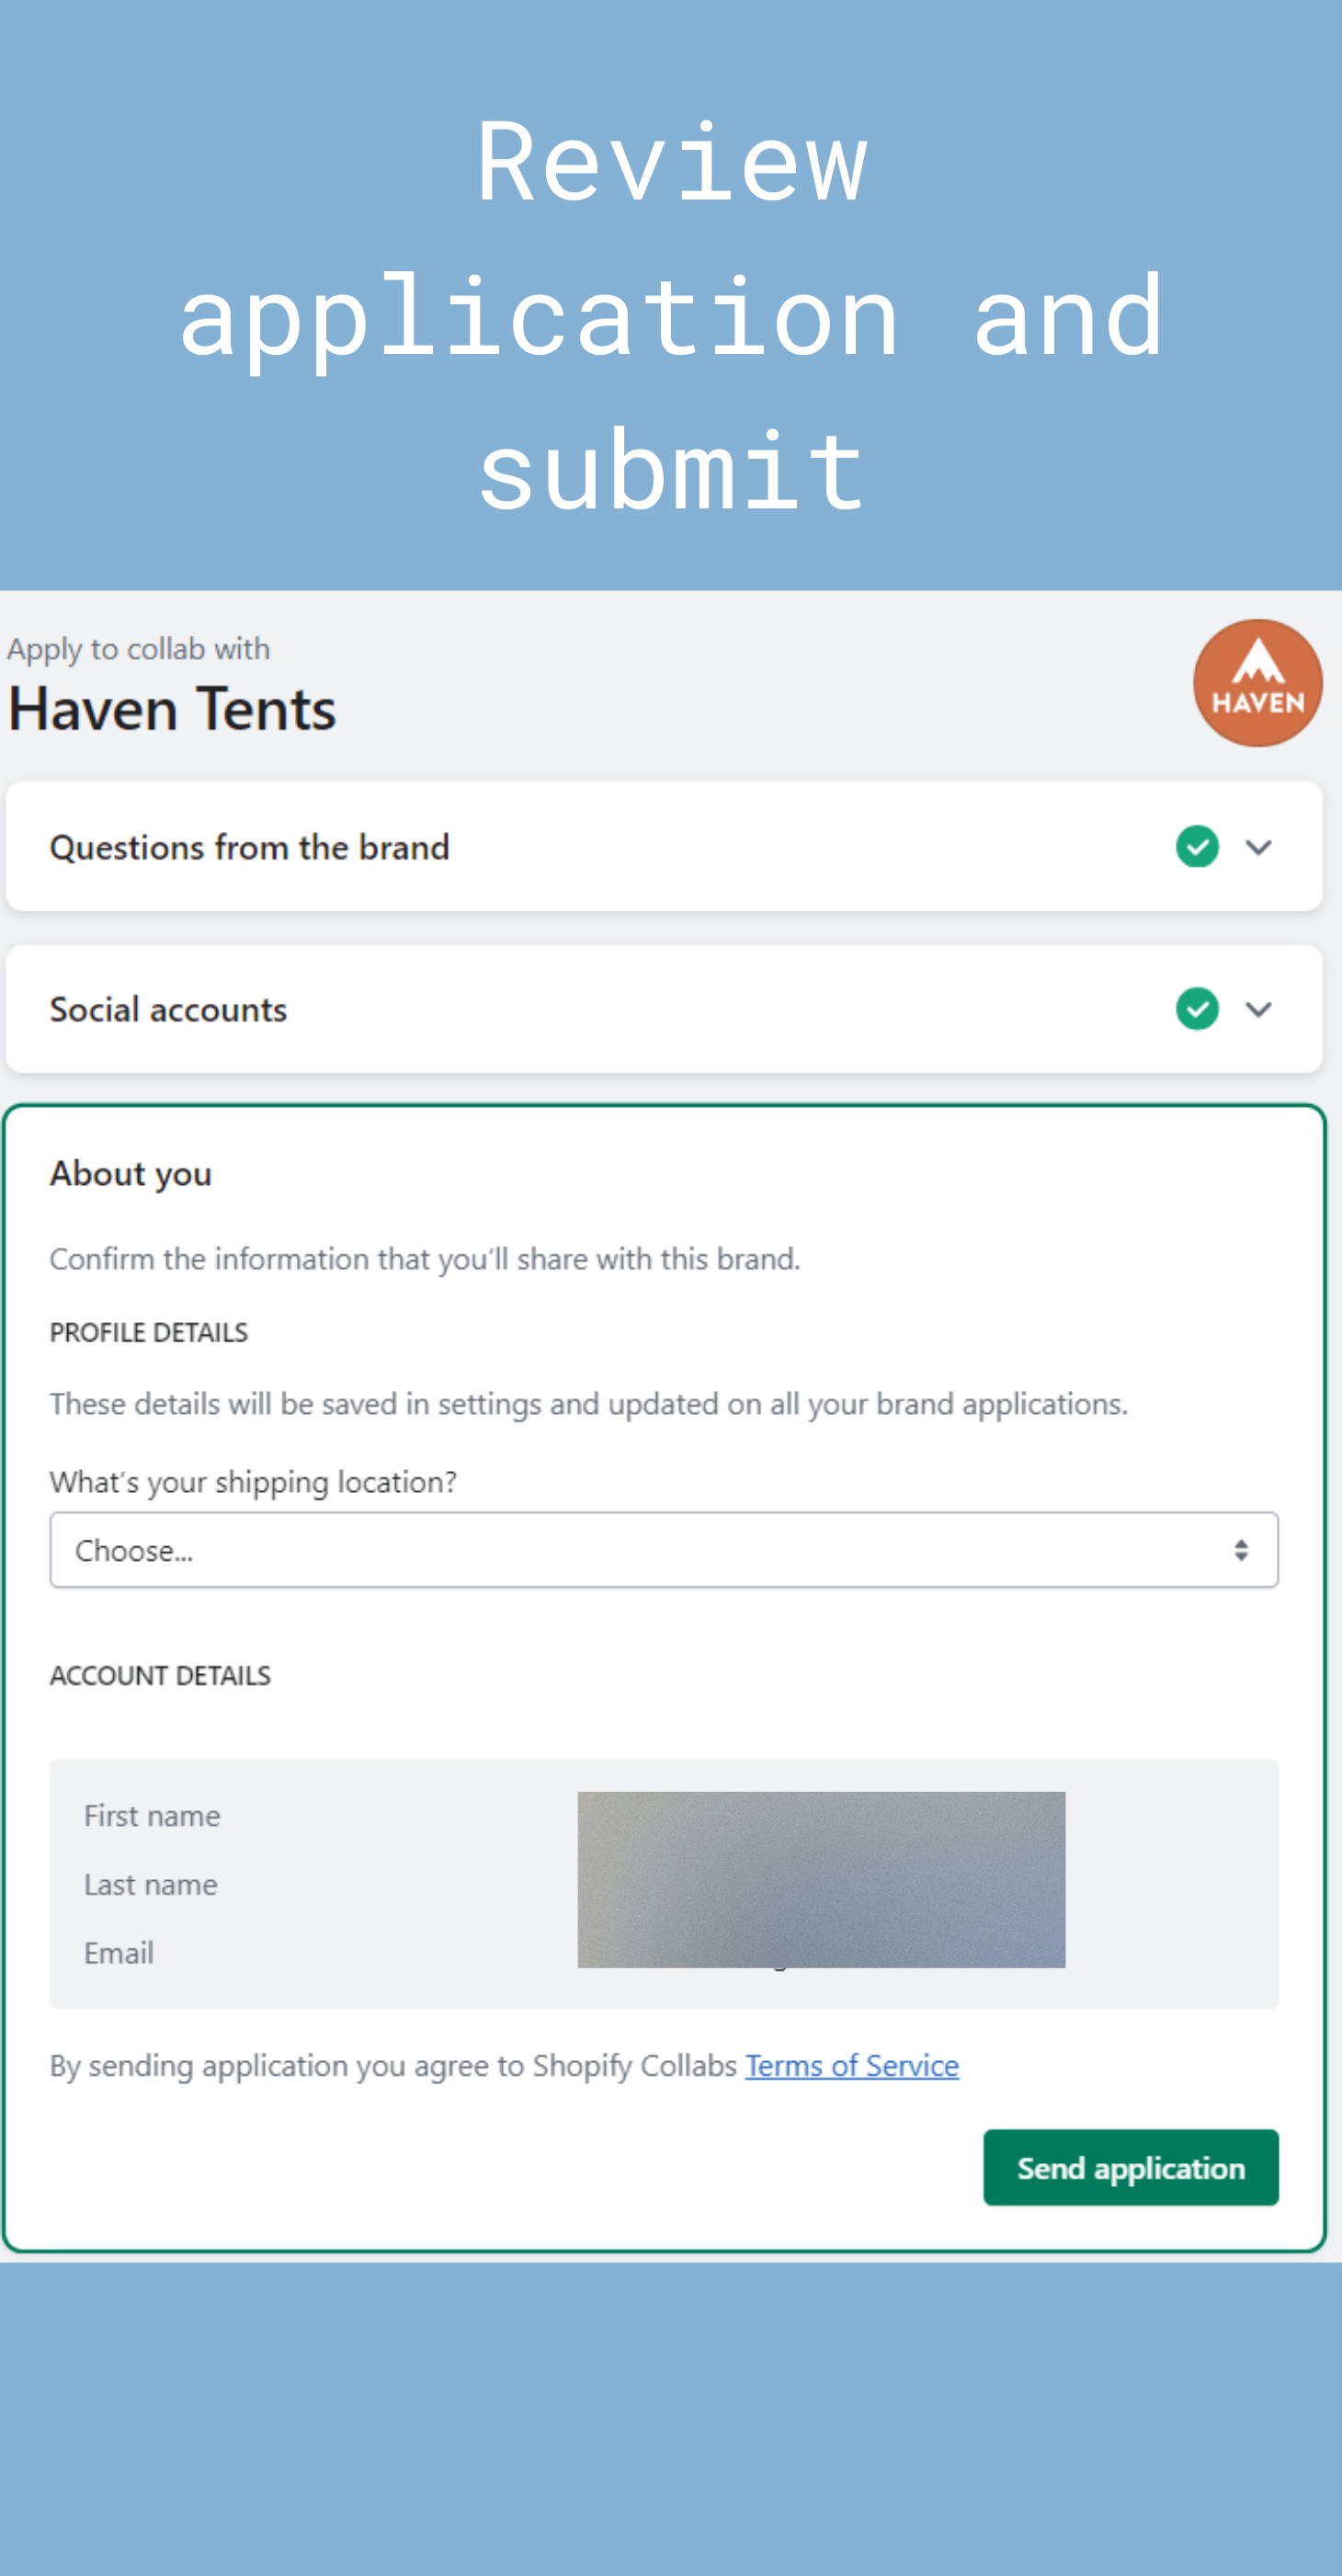 Apply + Purchase. Applying is quick and easy: Apply through the Haven Creators Network. Once approved, you'll get your 10% off discount code and your HCN affiliate link. Purchase a Haven Tent (Standard, XL, or Safari) + one Works Bundle and start creating! Submit completed Creator Tasks and earn cashback! Apply Now